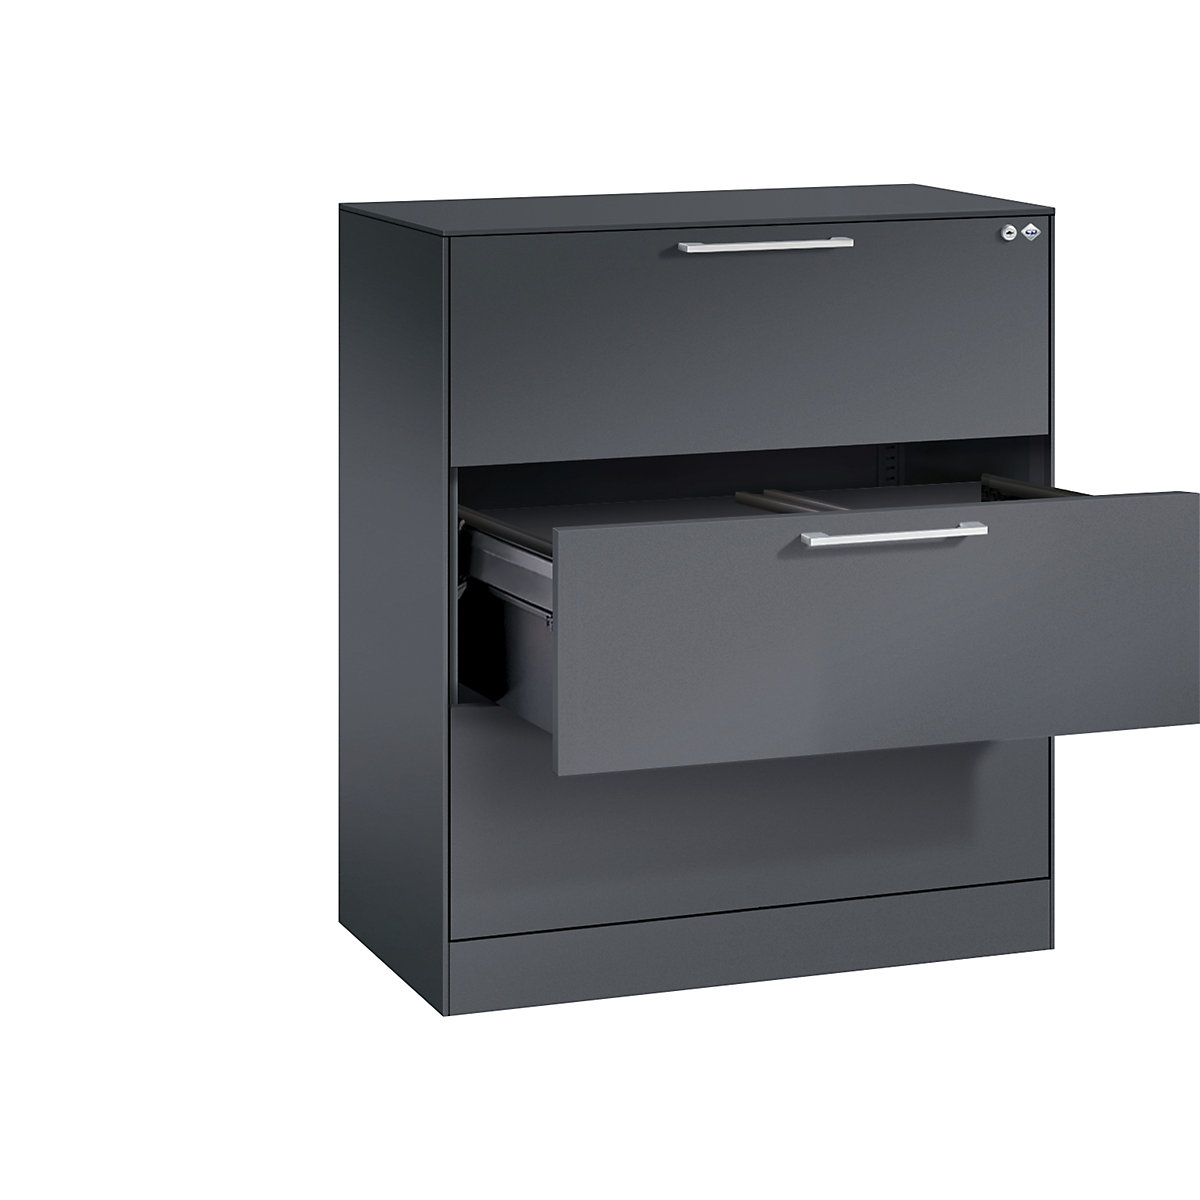 ASISTO suspension filing cabinet – C+P, width 800 mm, with 3 drawers, black grey/black grey-11